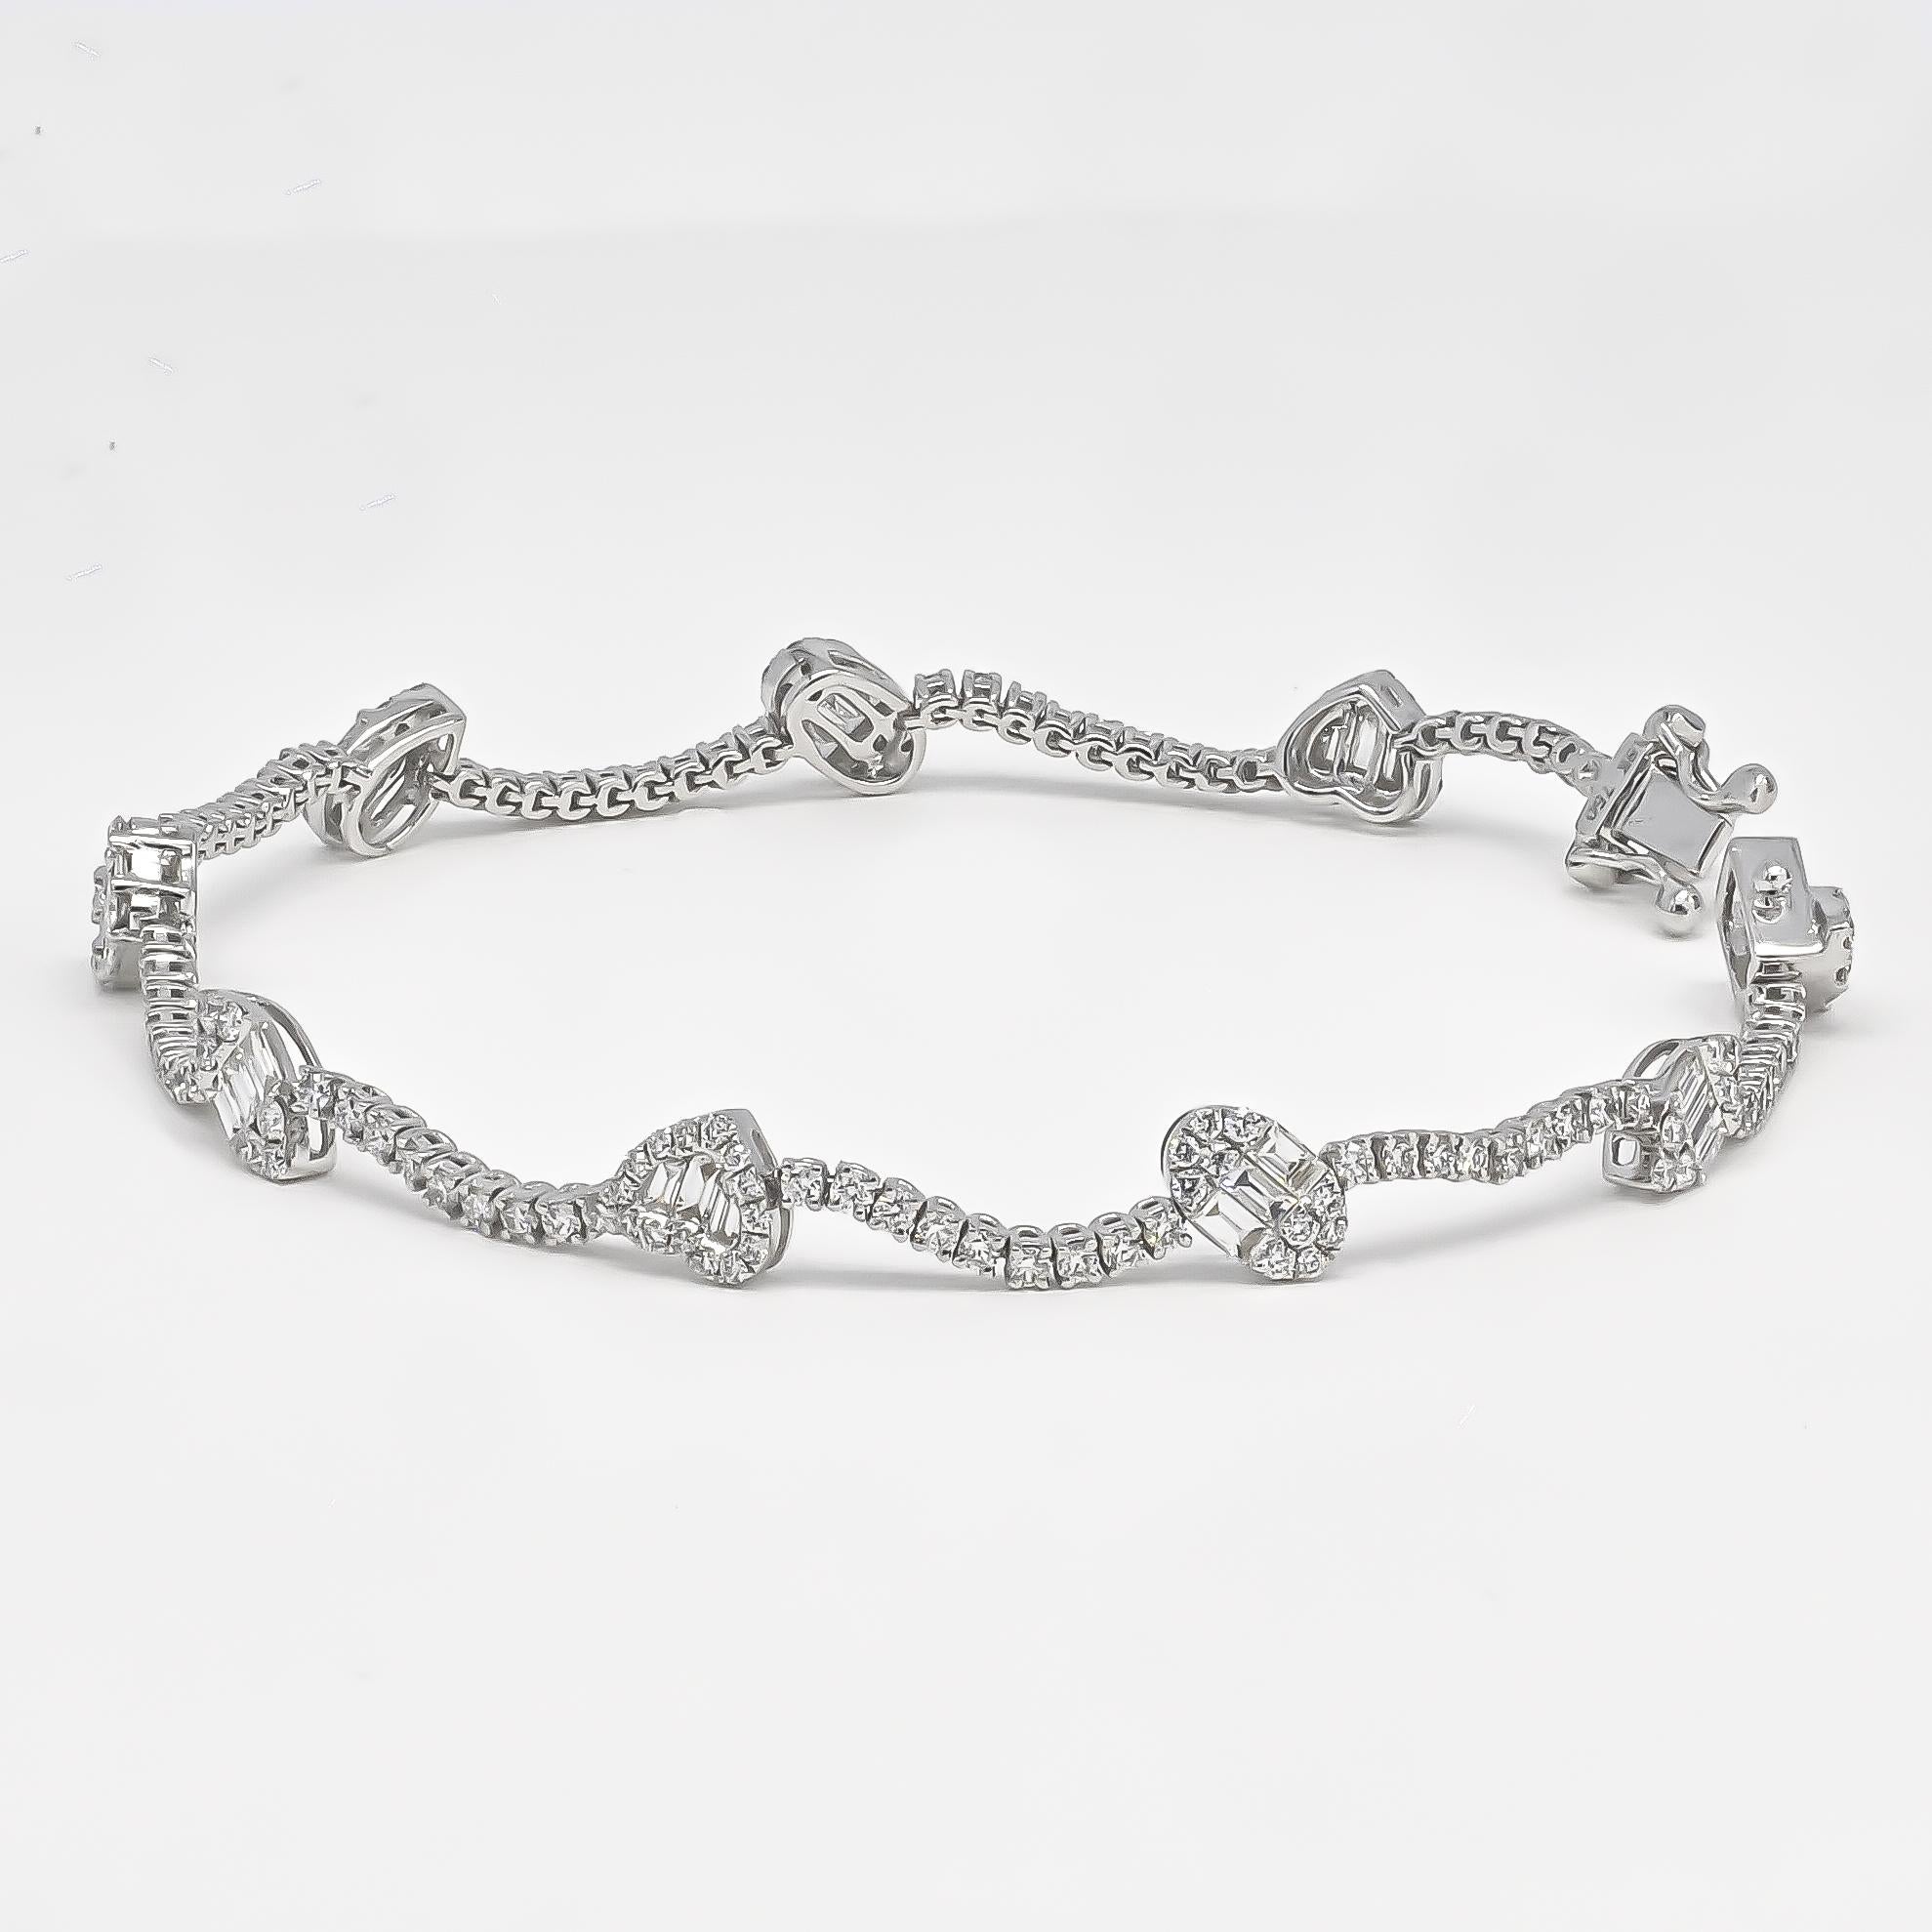 Truly beautiful. Exquisite diamond Tapered Baguette and Round Multi shaped clusters are linked together with single row to form this unforgettably elegant tennis bracelet.

Make sparkle a priority with this glamorous diamond tennis bracelet.